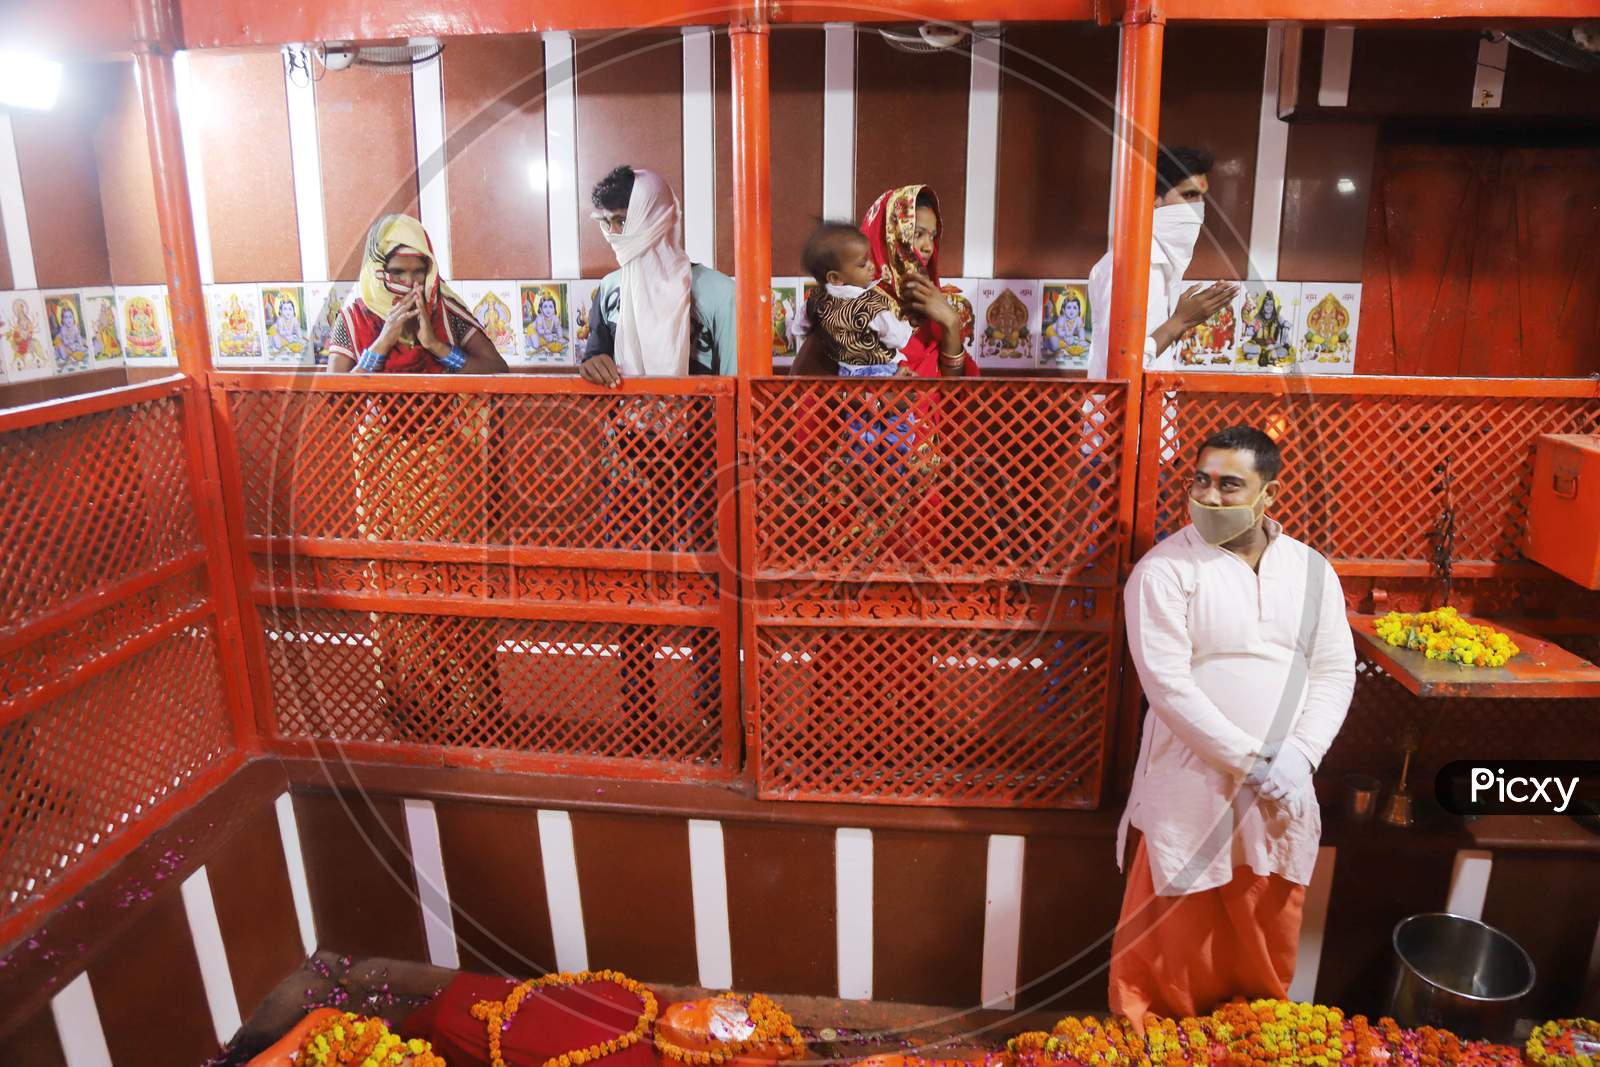 Hindu Devotees Offer Prayers After Reopening of a Temple , In Prayagraj, June 8, 2020.